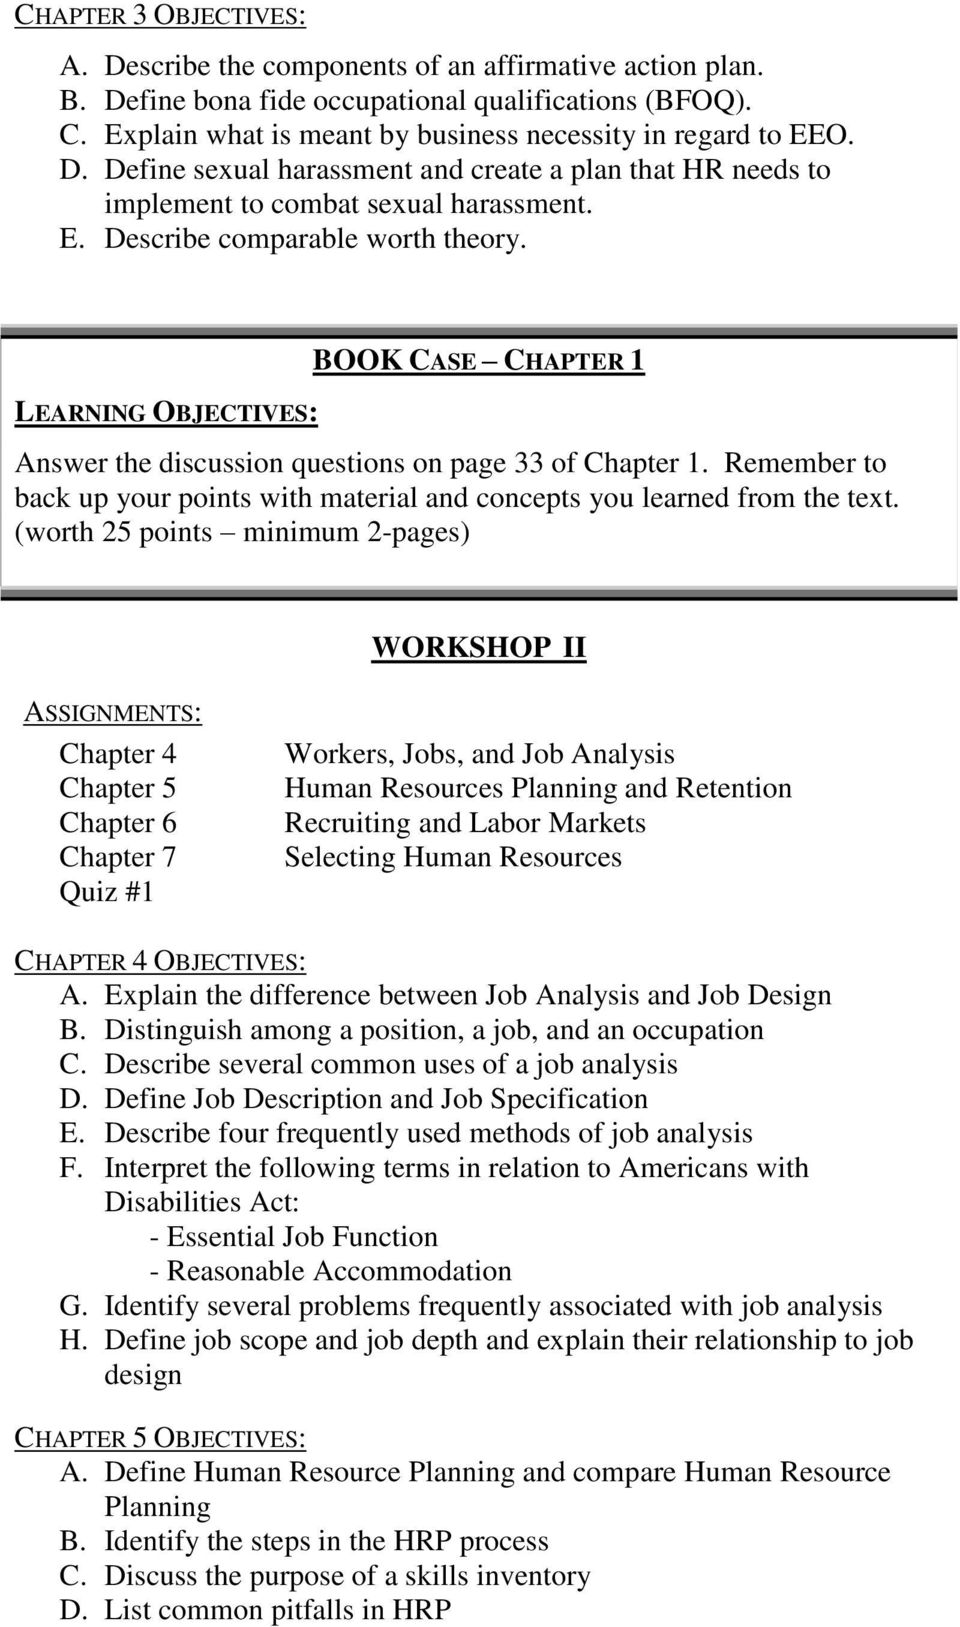 LEARNING OBJECTIVES: BOOK CASE CHAPTER 1 Answer the discussion questions on page 33 of Chapter 1. Remember to back up your points with material and concepts you learned from the text.